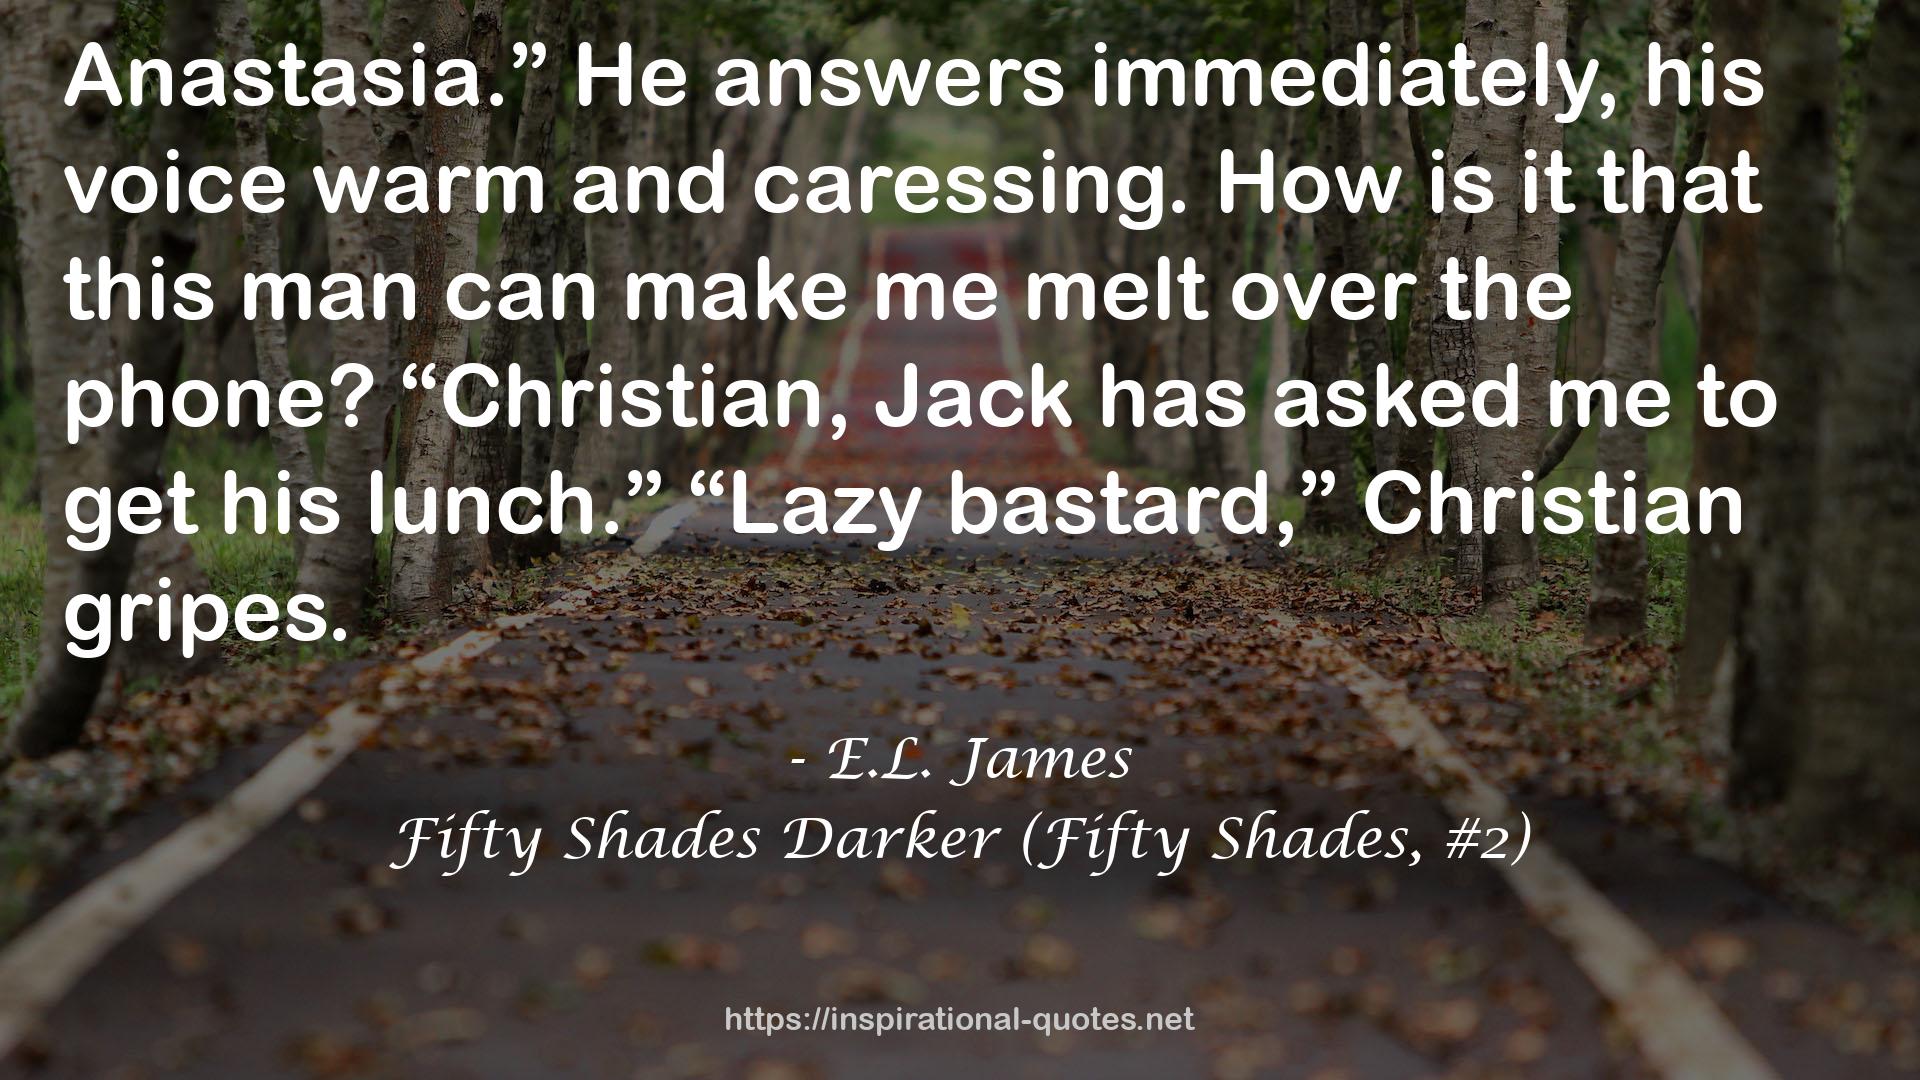 Fifty Shades Darker (Fifty Shades, #2) QUOTES